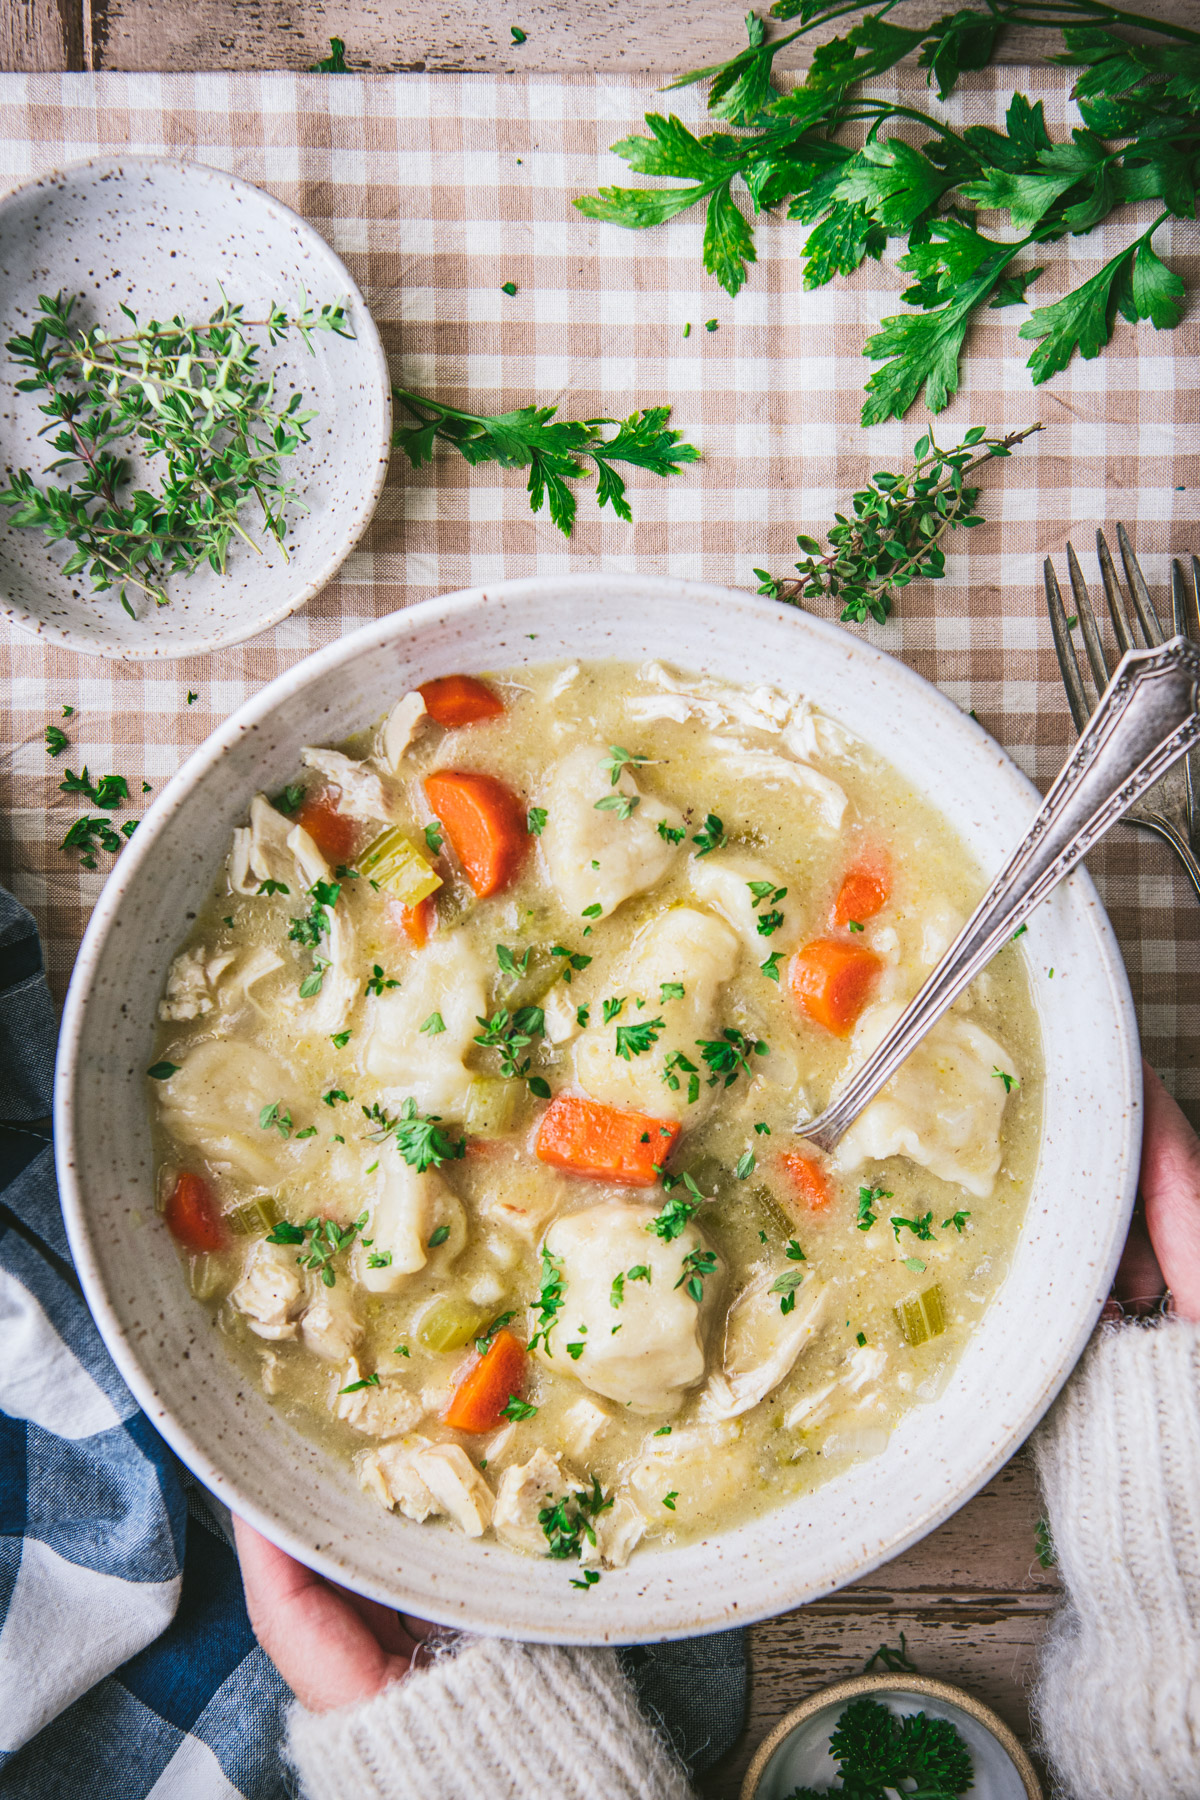 An overhead shot of a bowl of chicken and dumplings, and a woman's hands wrapped around the bowl. The bowl is filled with fluffy dumplings, carrots, celery, and shredded chicken in a creamy broth.